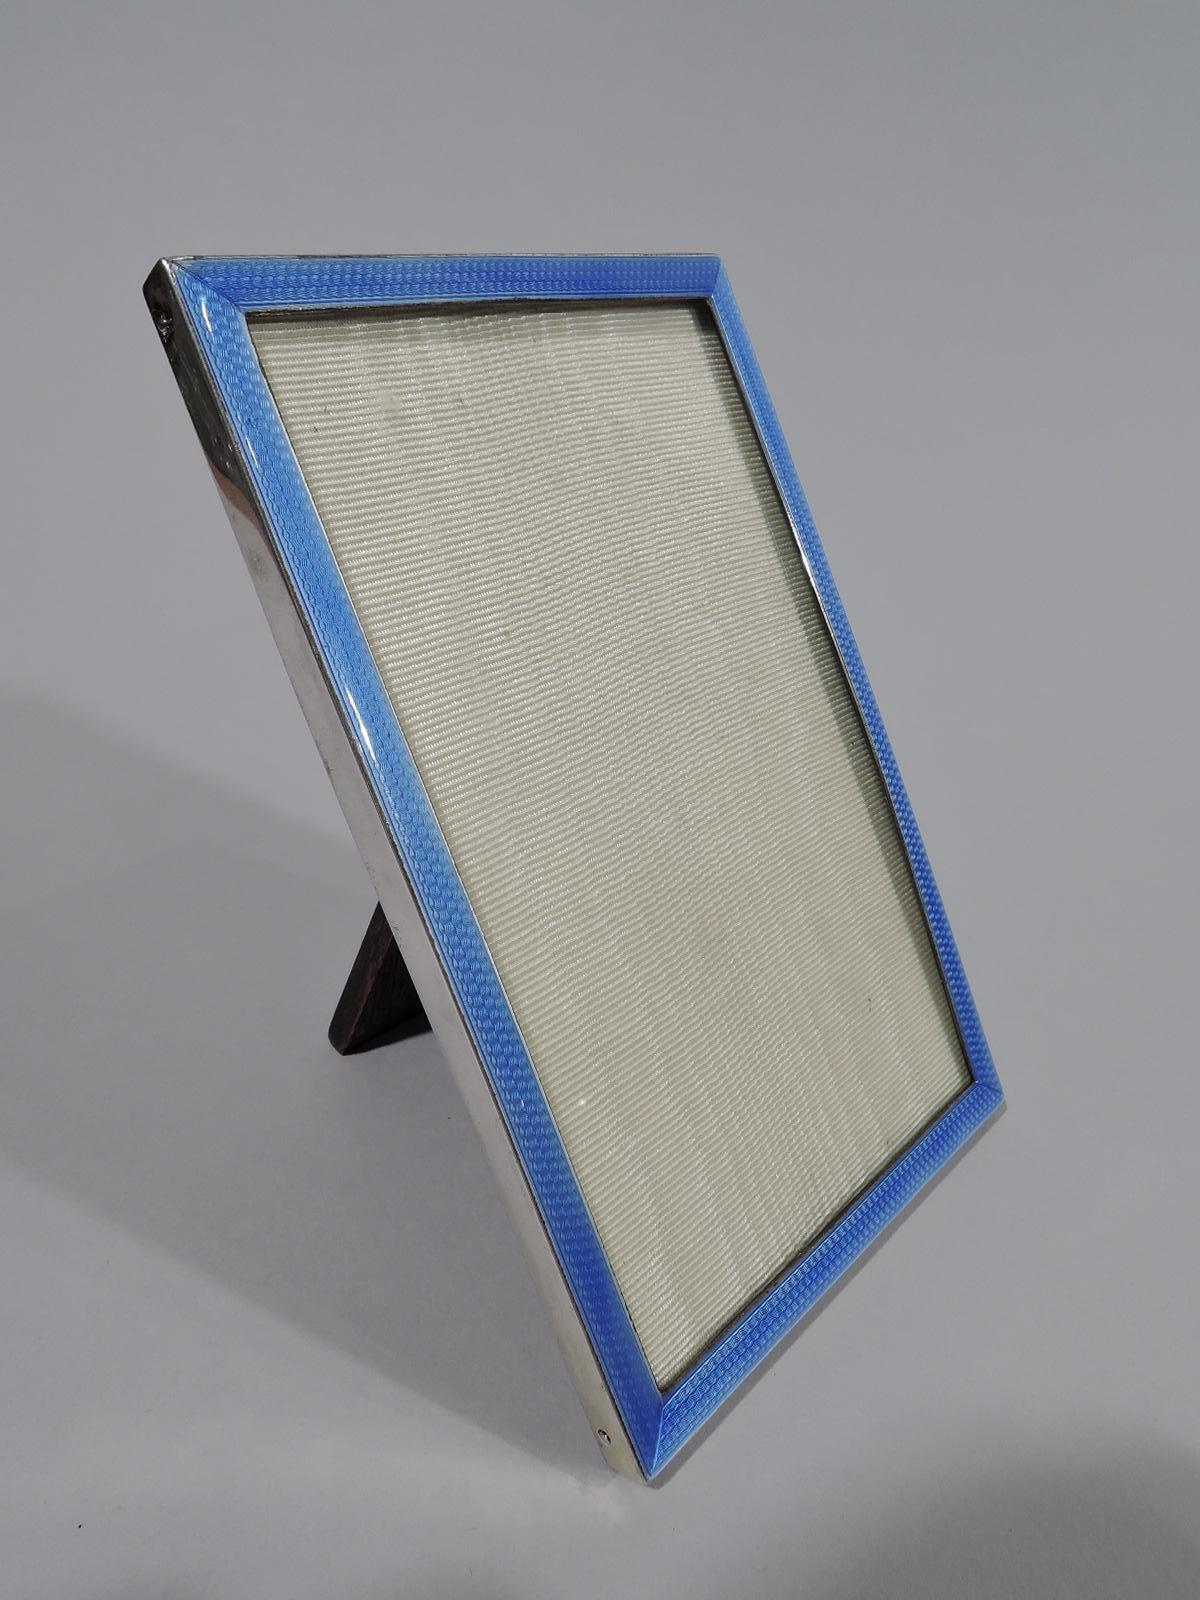 Art Deco sterling silver and enamel picture frame. Made in Birmingham in 1928.Rectangular window bordered by wraparound blue guilloche enamel. Sides sterling silver. With glass, silk lining, and stained-wood back and flush hinged support. For